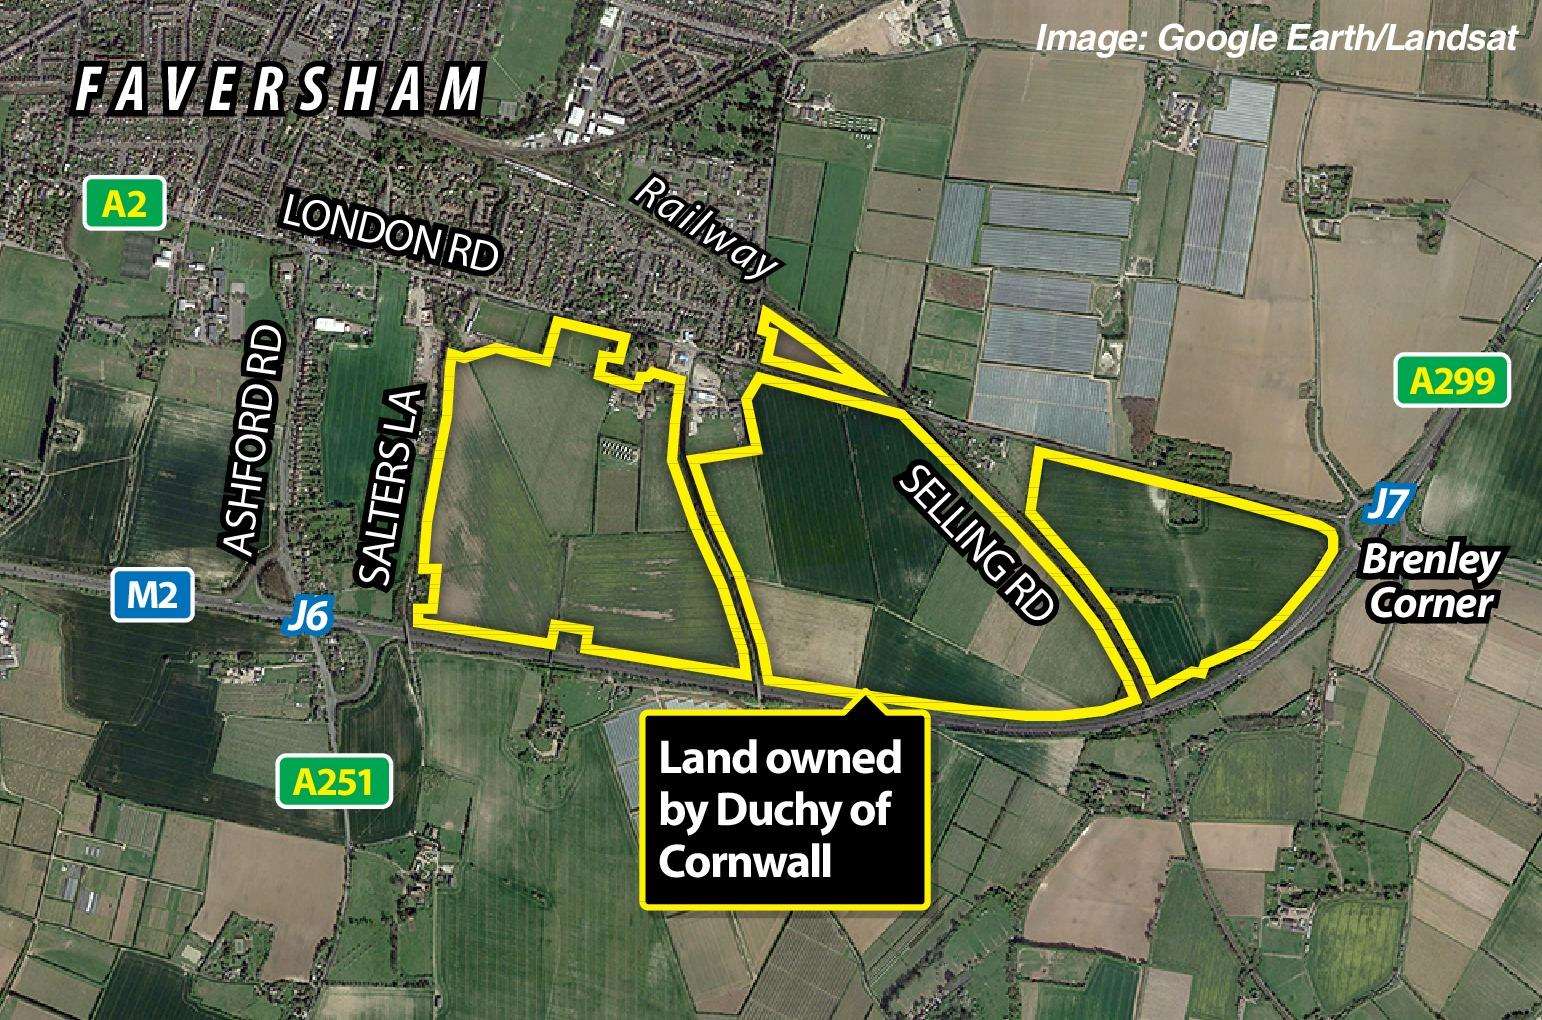 Land owned by the Duchy of Cornwall on the outskirts of Faversham